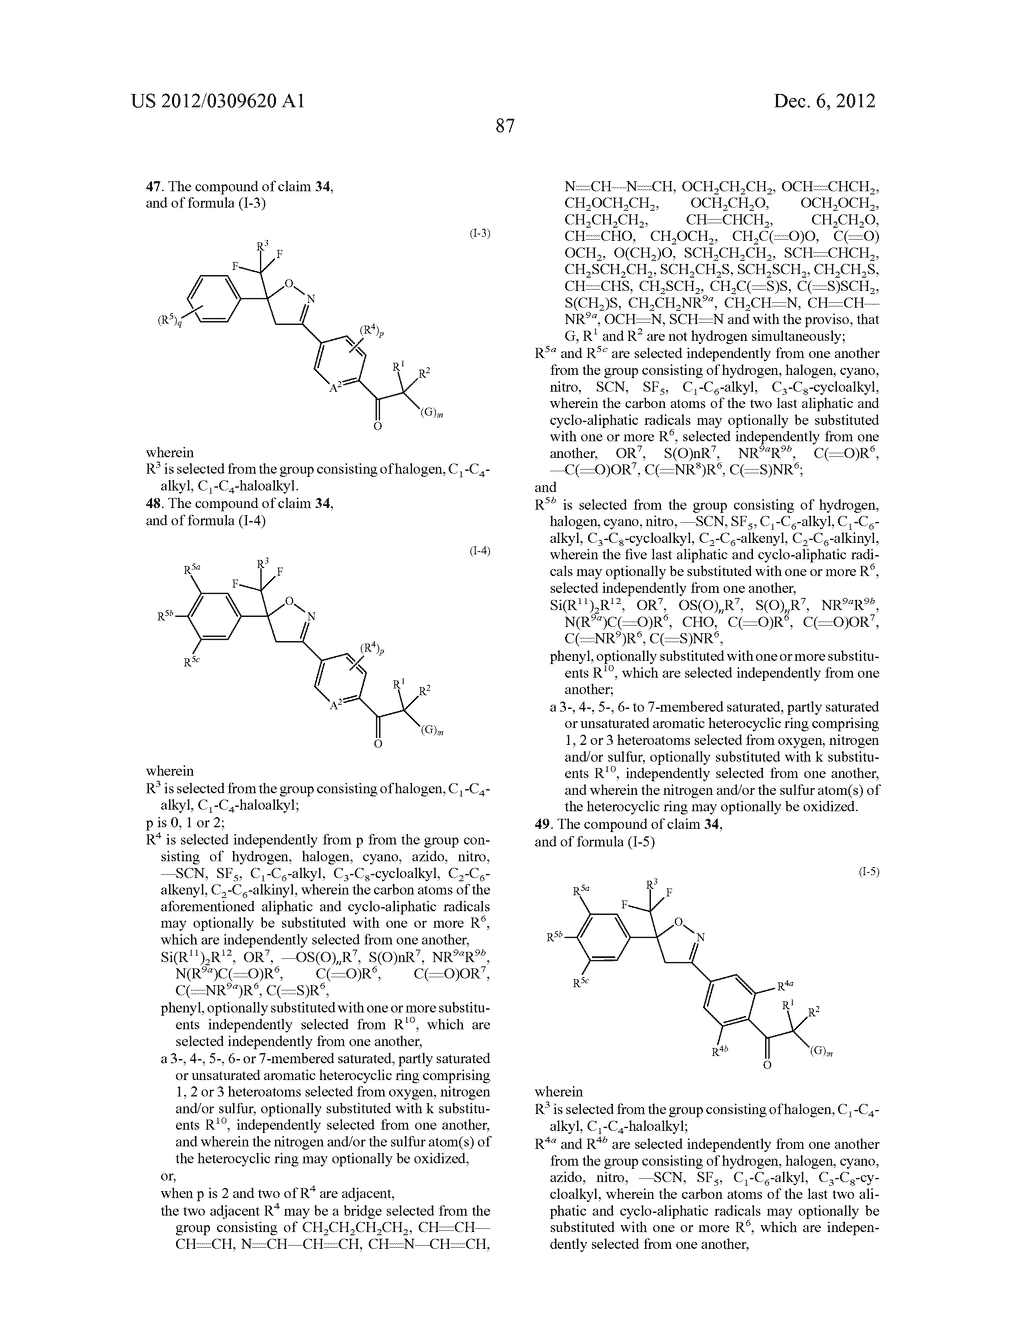 Substituted ketonic isoxazoline compounds and derivatives for combating     animal pests - diagram, schematic, and image 88